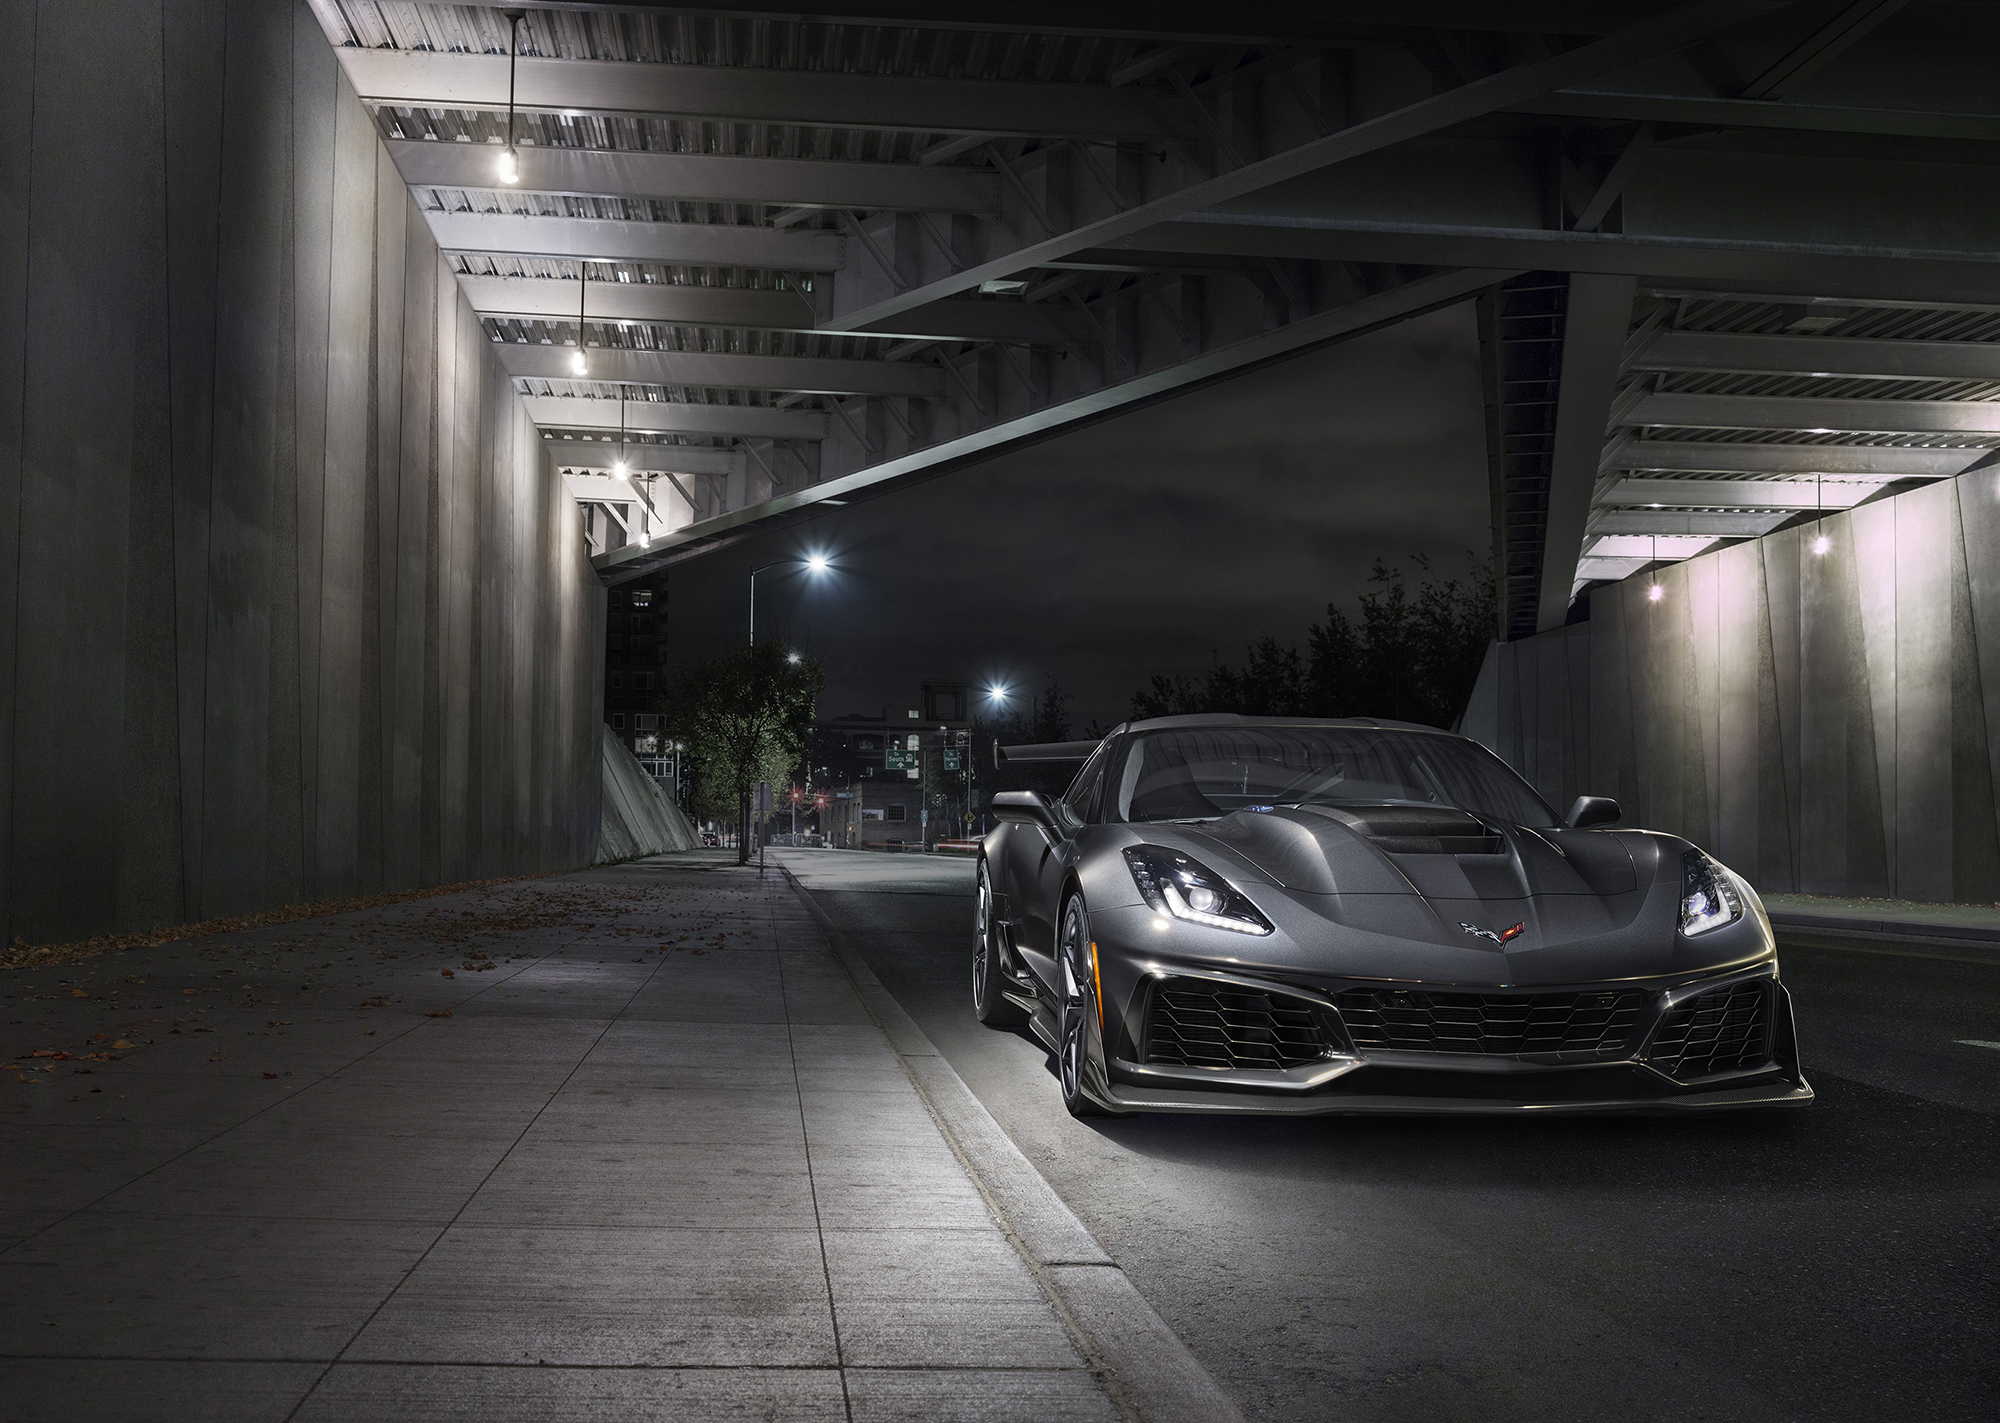 The fastest, most powerful production Corvette ever – the 755-horsepower 2019 ZR1.